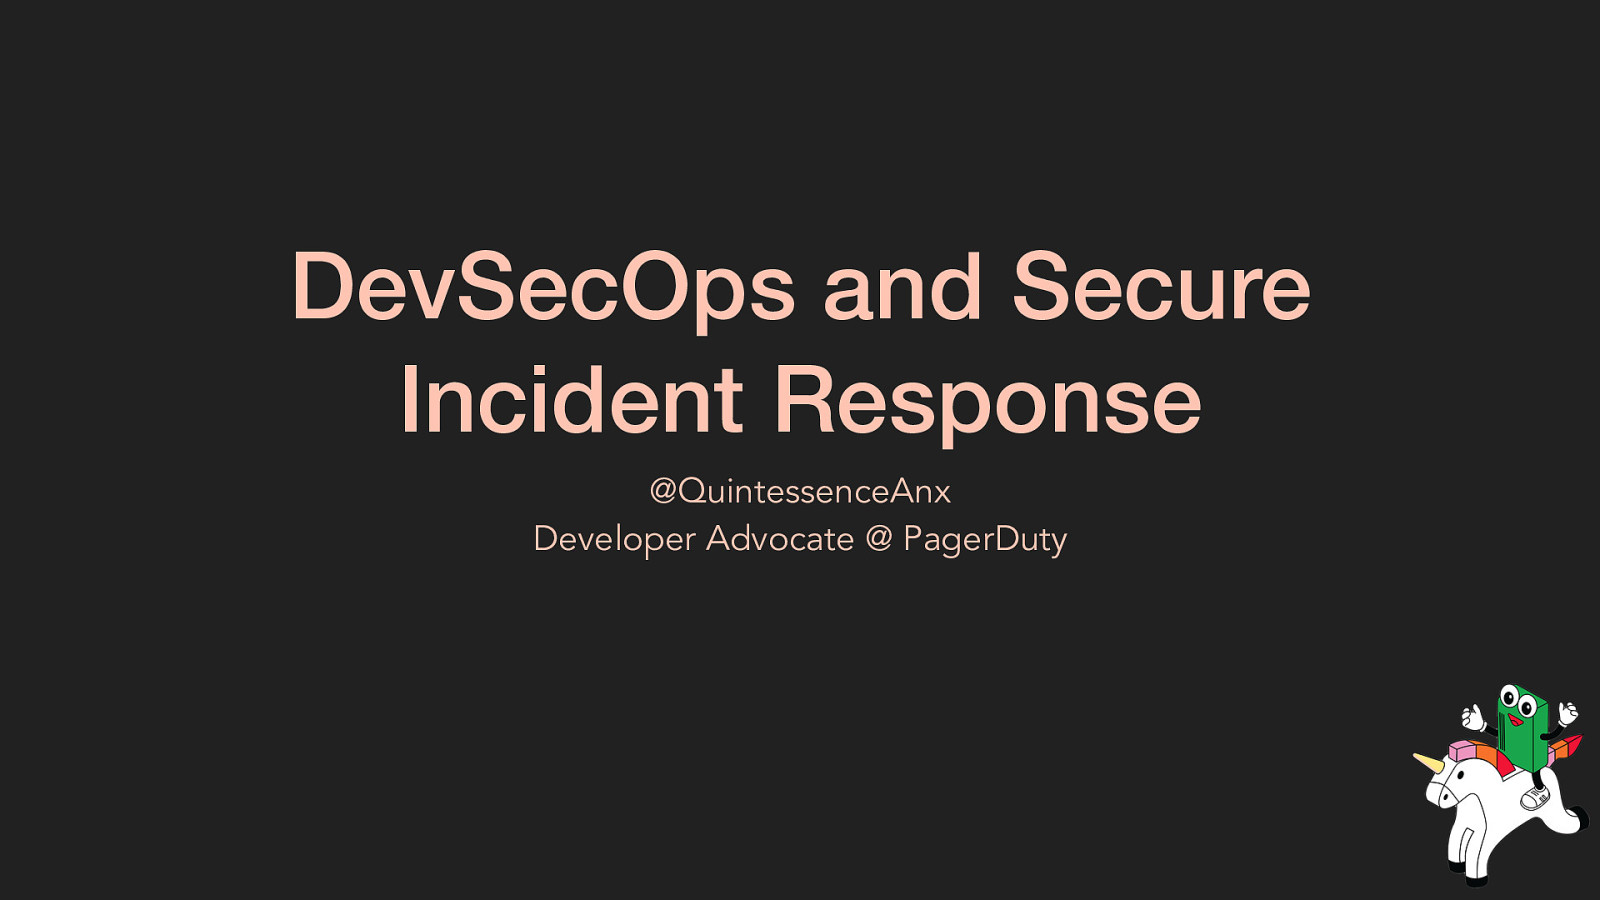 DevSecOps and Secure Incident Response